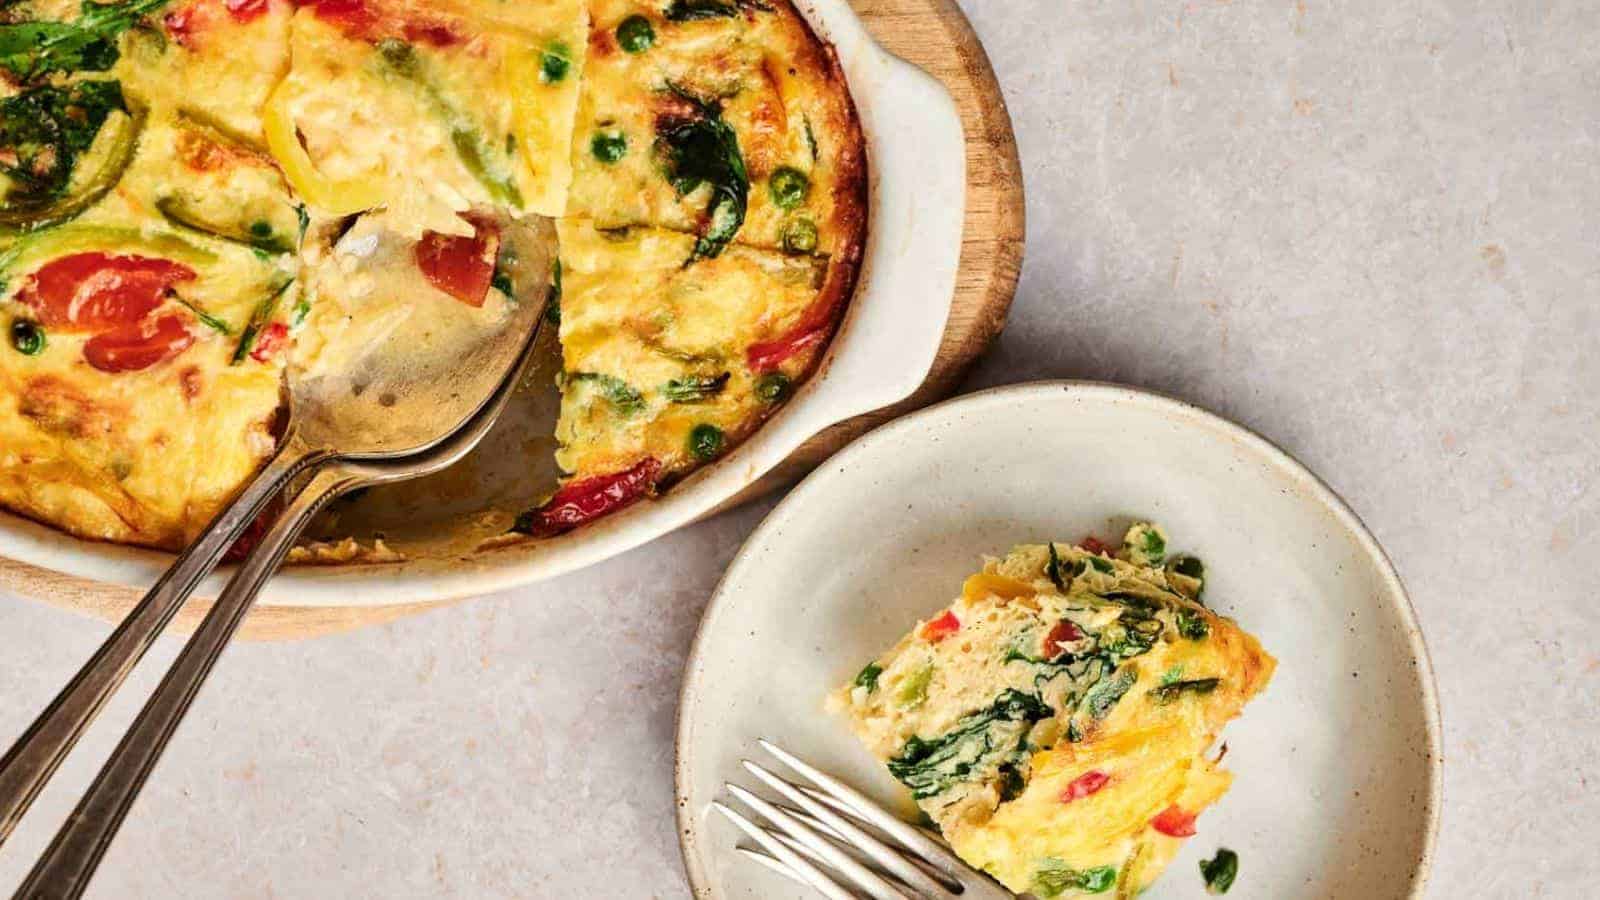 <p>Nothing can beat the balance of flavors in Egg and Potato Breakfast Casserole. It’s hearty, nutritious, and surprisingly straightforward to prepare. It’s quite the motivator for getting out of bed, leaving all thoughts of hitting the snooze button behind.<br><strong>Get the Recipe: </strong><a href="https://www.splashoftaste.com/egg-and-potato-breakfast-casserole?utm_source=msn&utm_medium=page&utm_campaign=msn">Egg and Potato Breakfast Casserole</a></p>